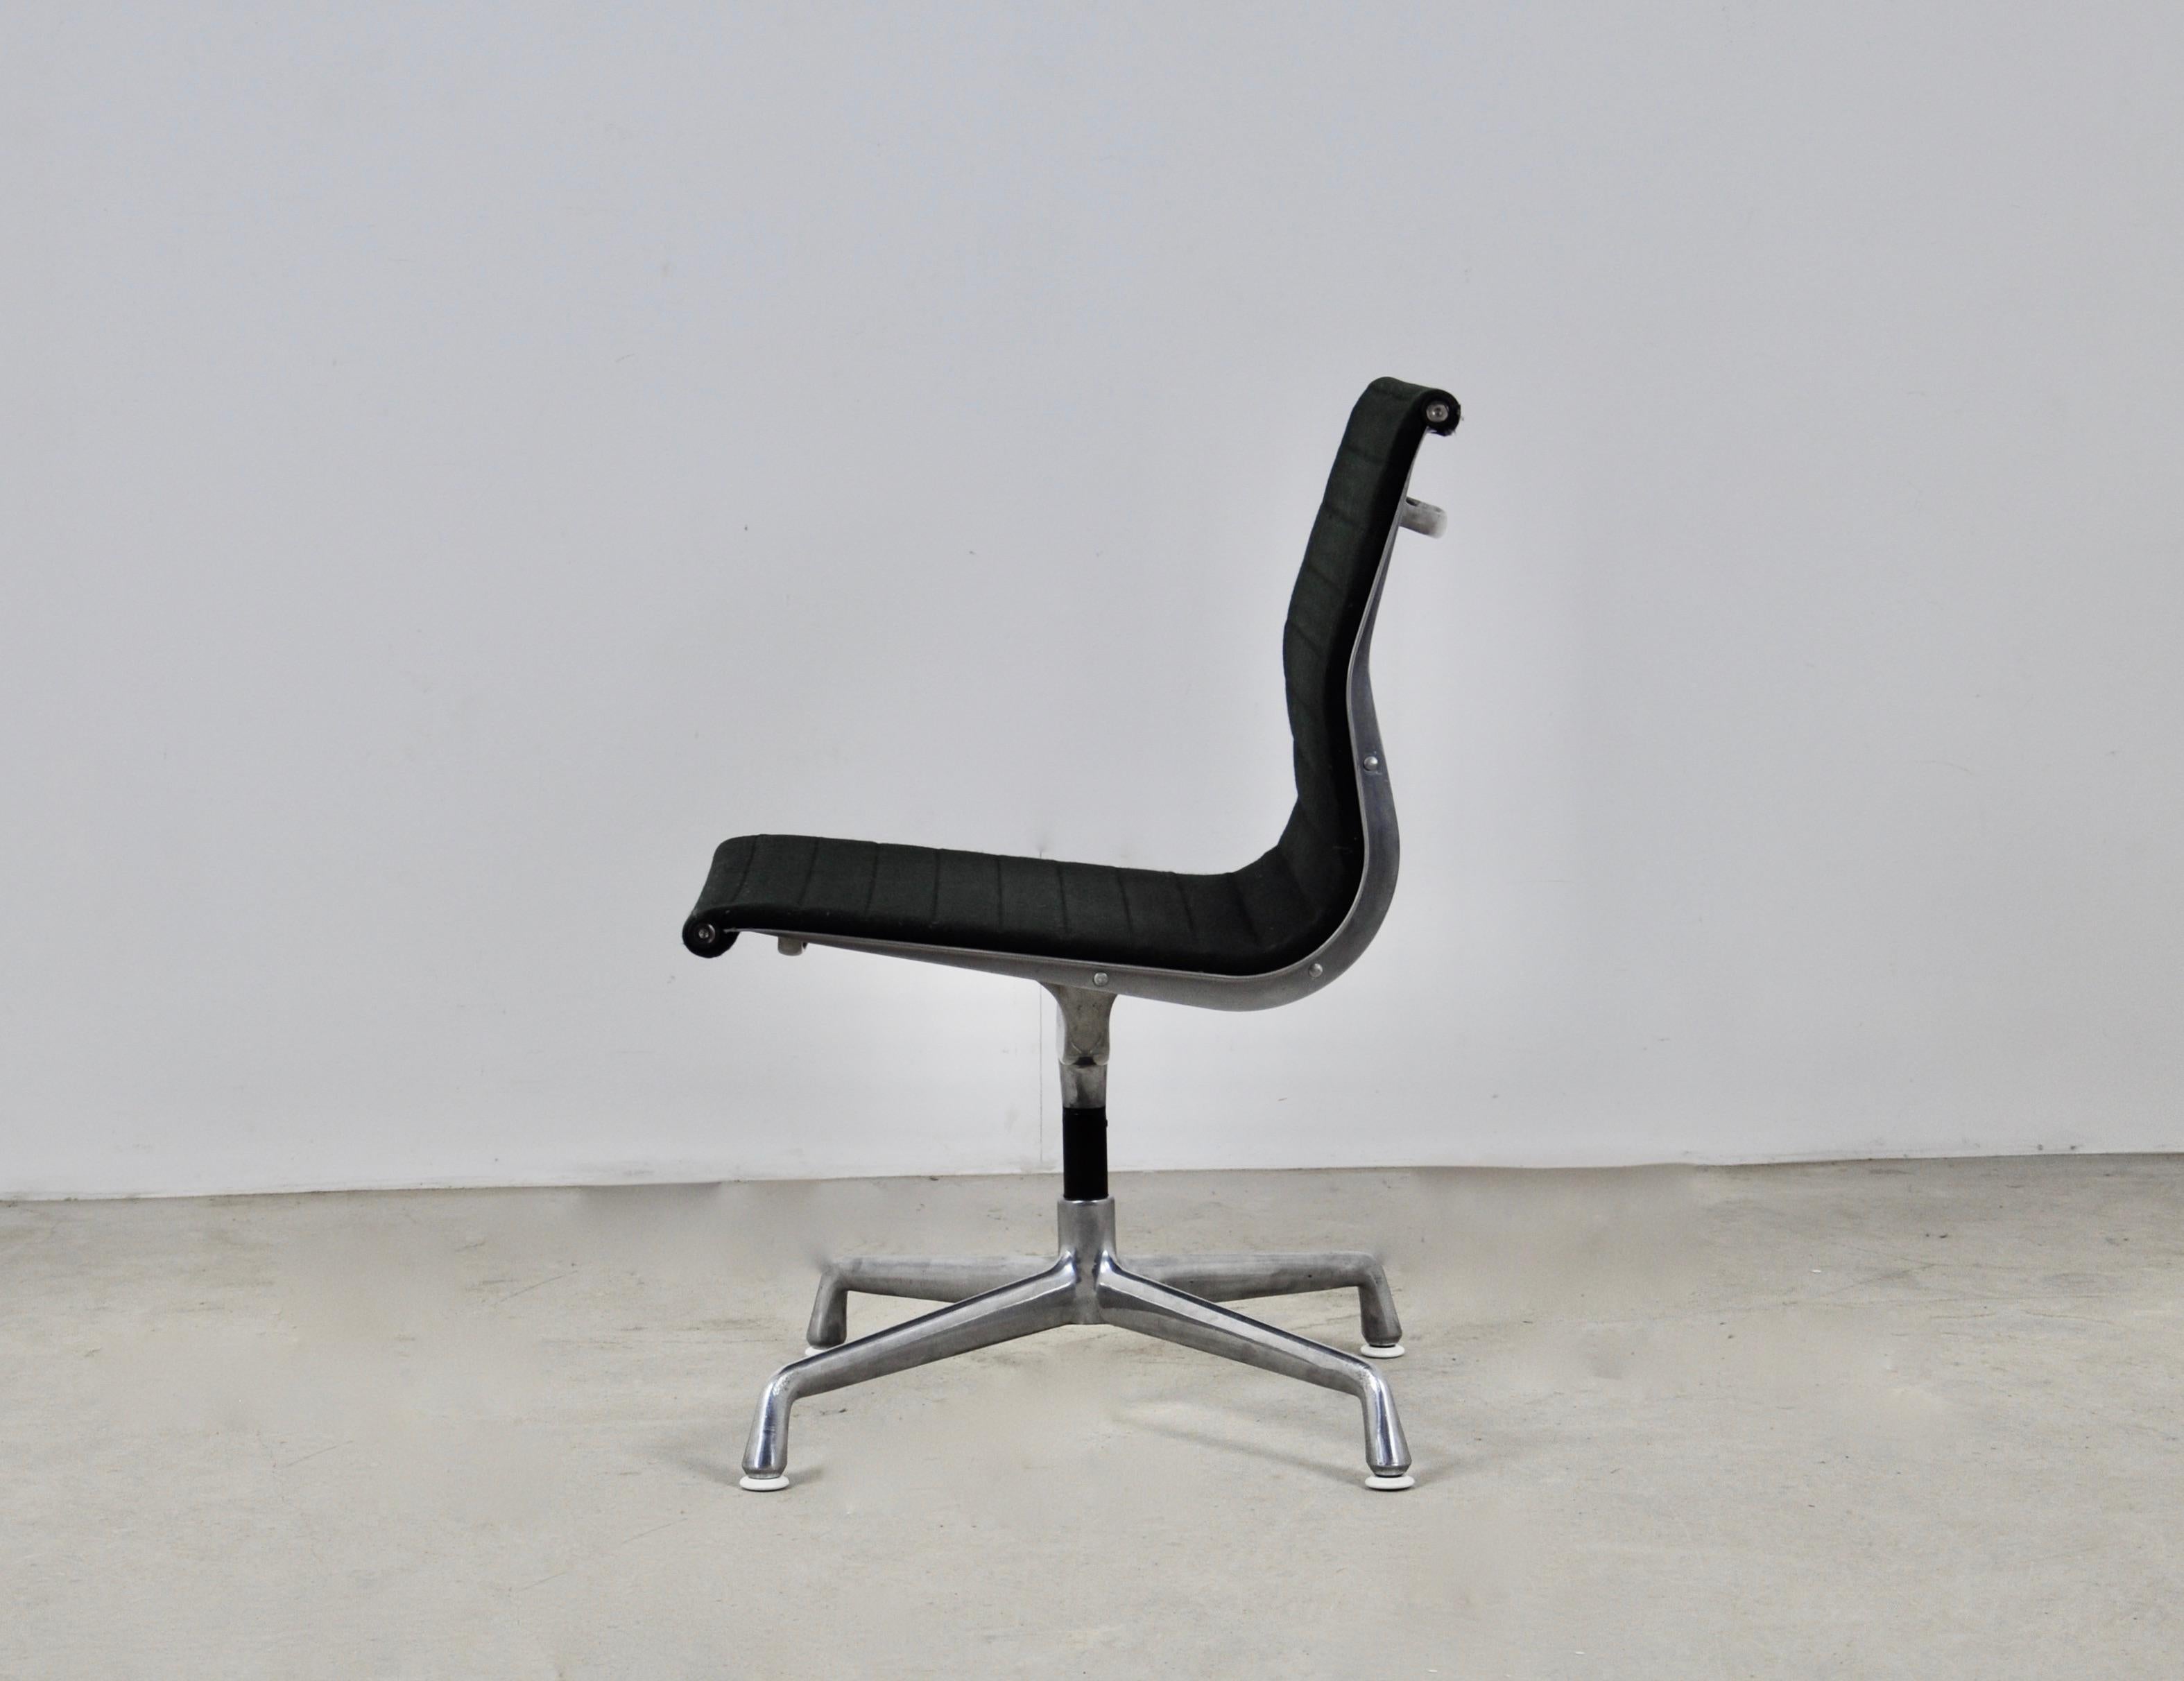 Mid-20th Century Black Office chair by Charles &Ray Eames for Herman Miller, 1960s For Sale